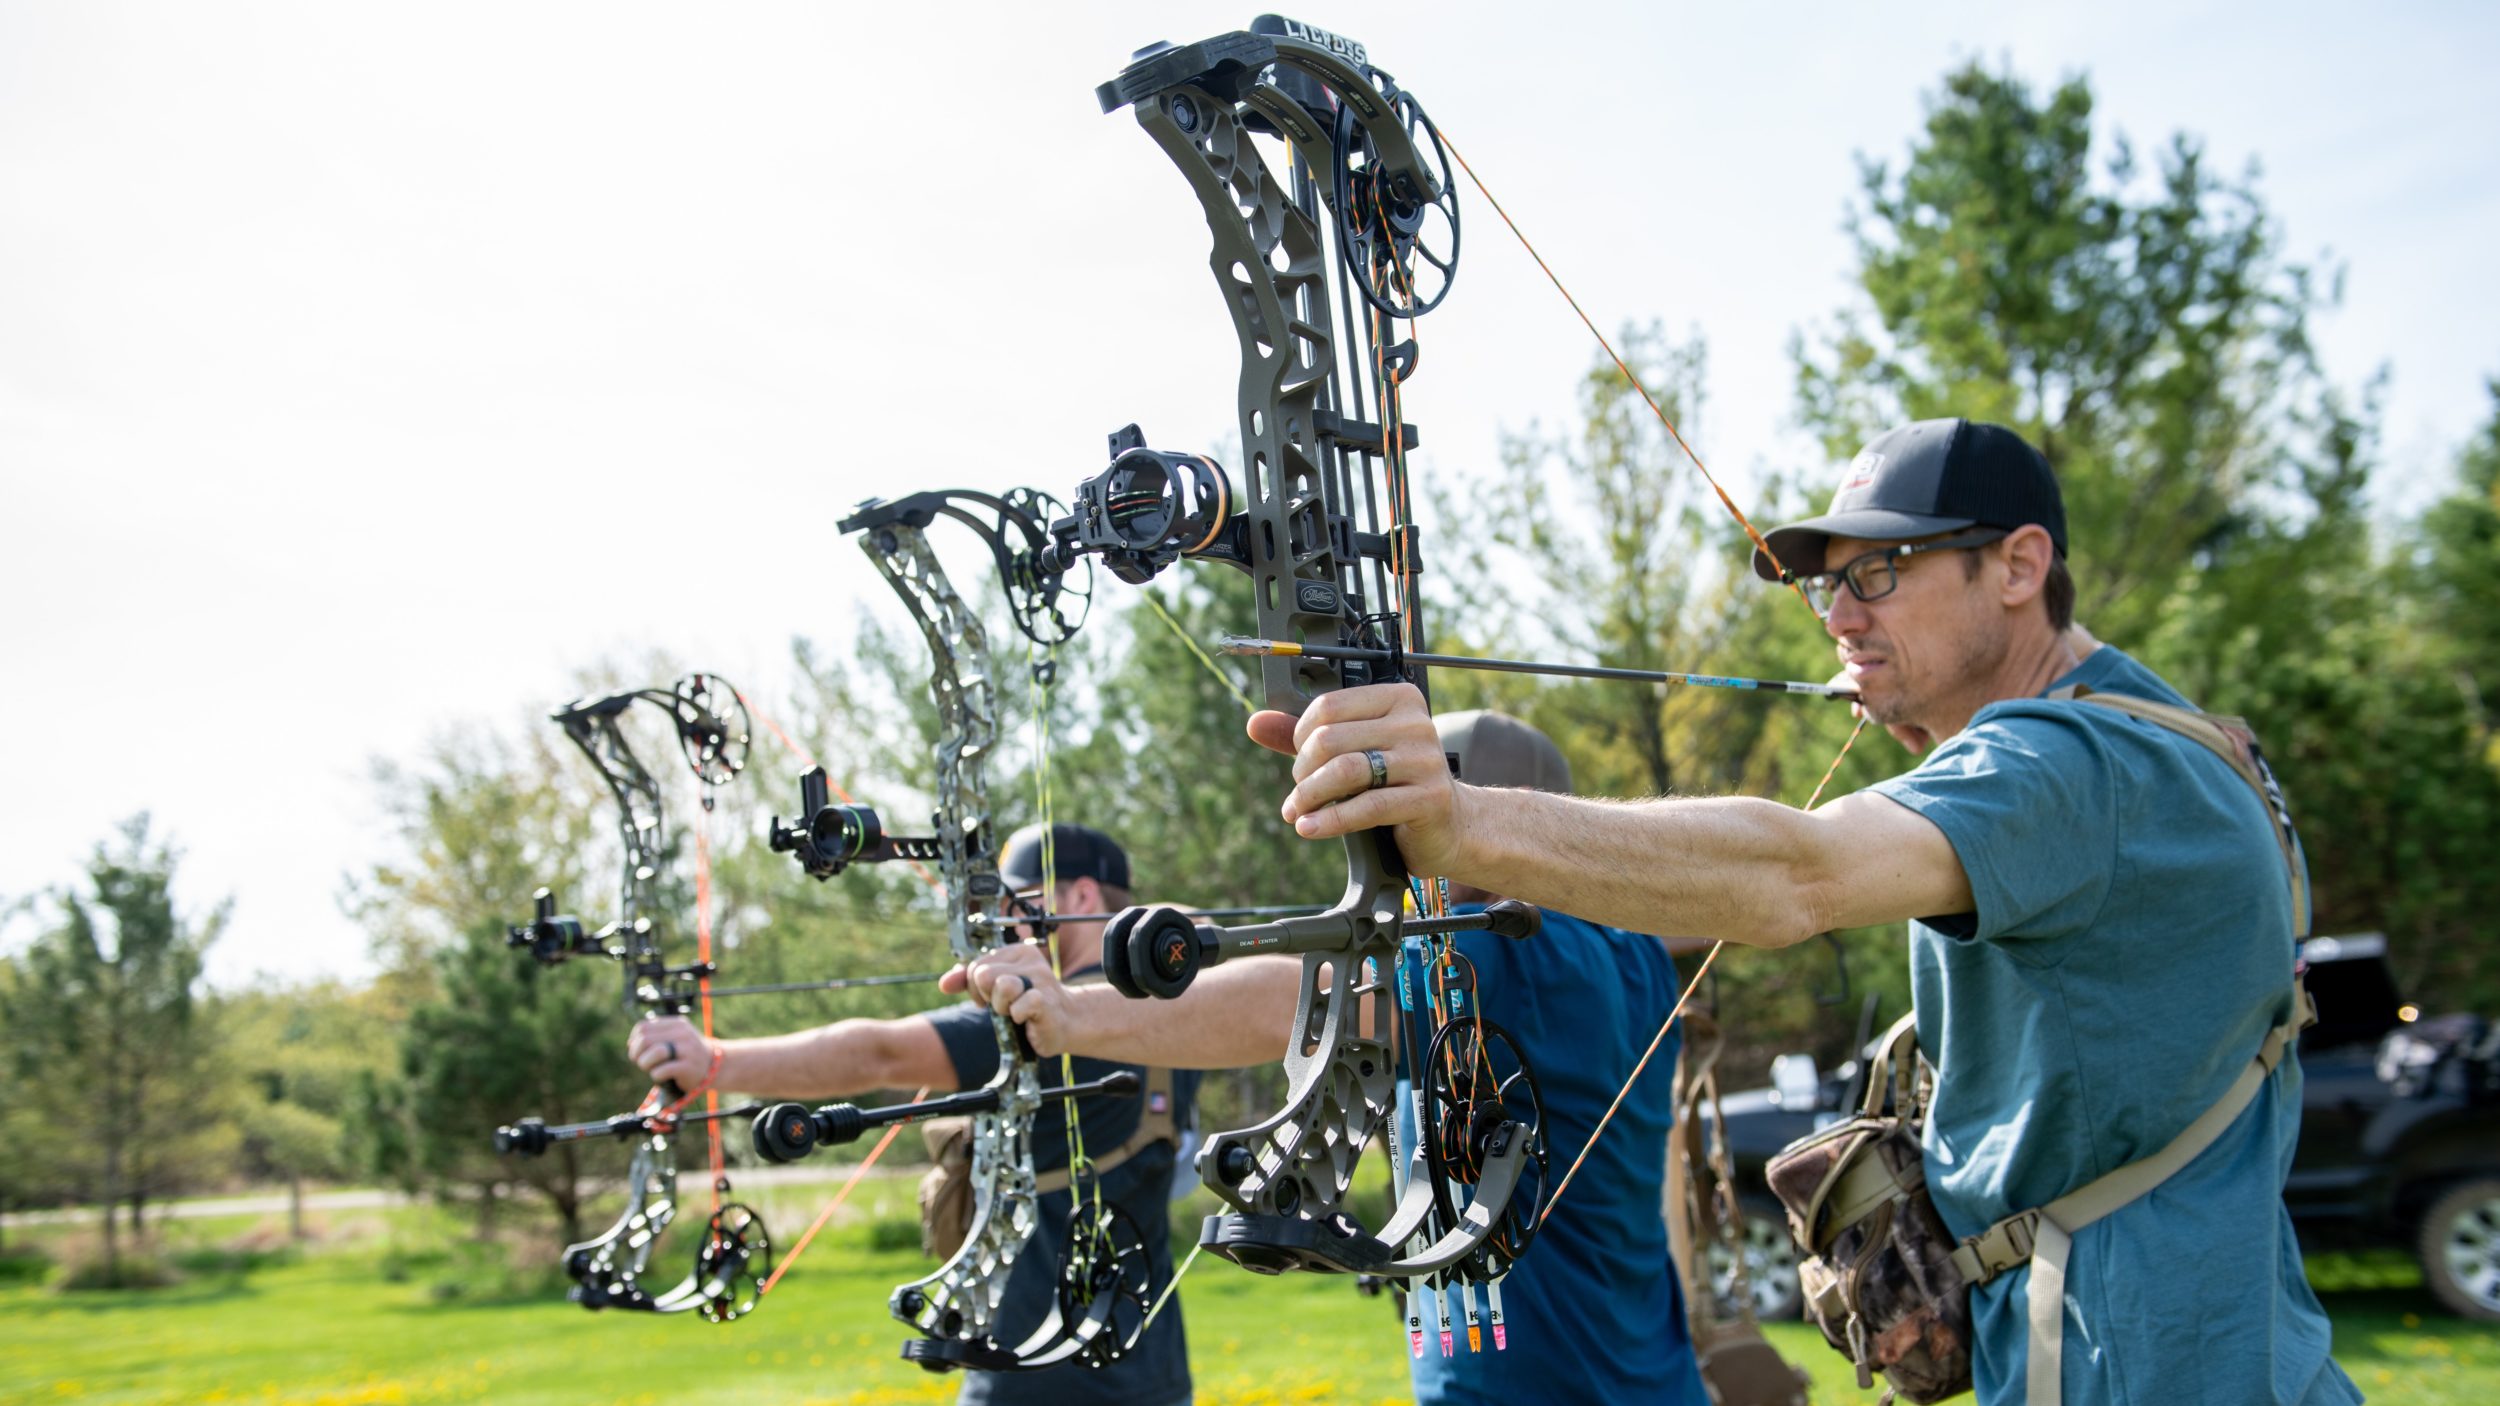 How To Determine Draw Length - Bowhunting.com